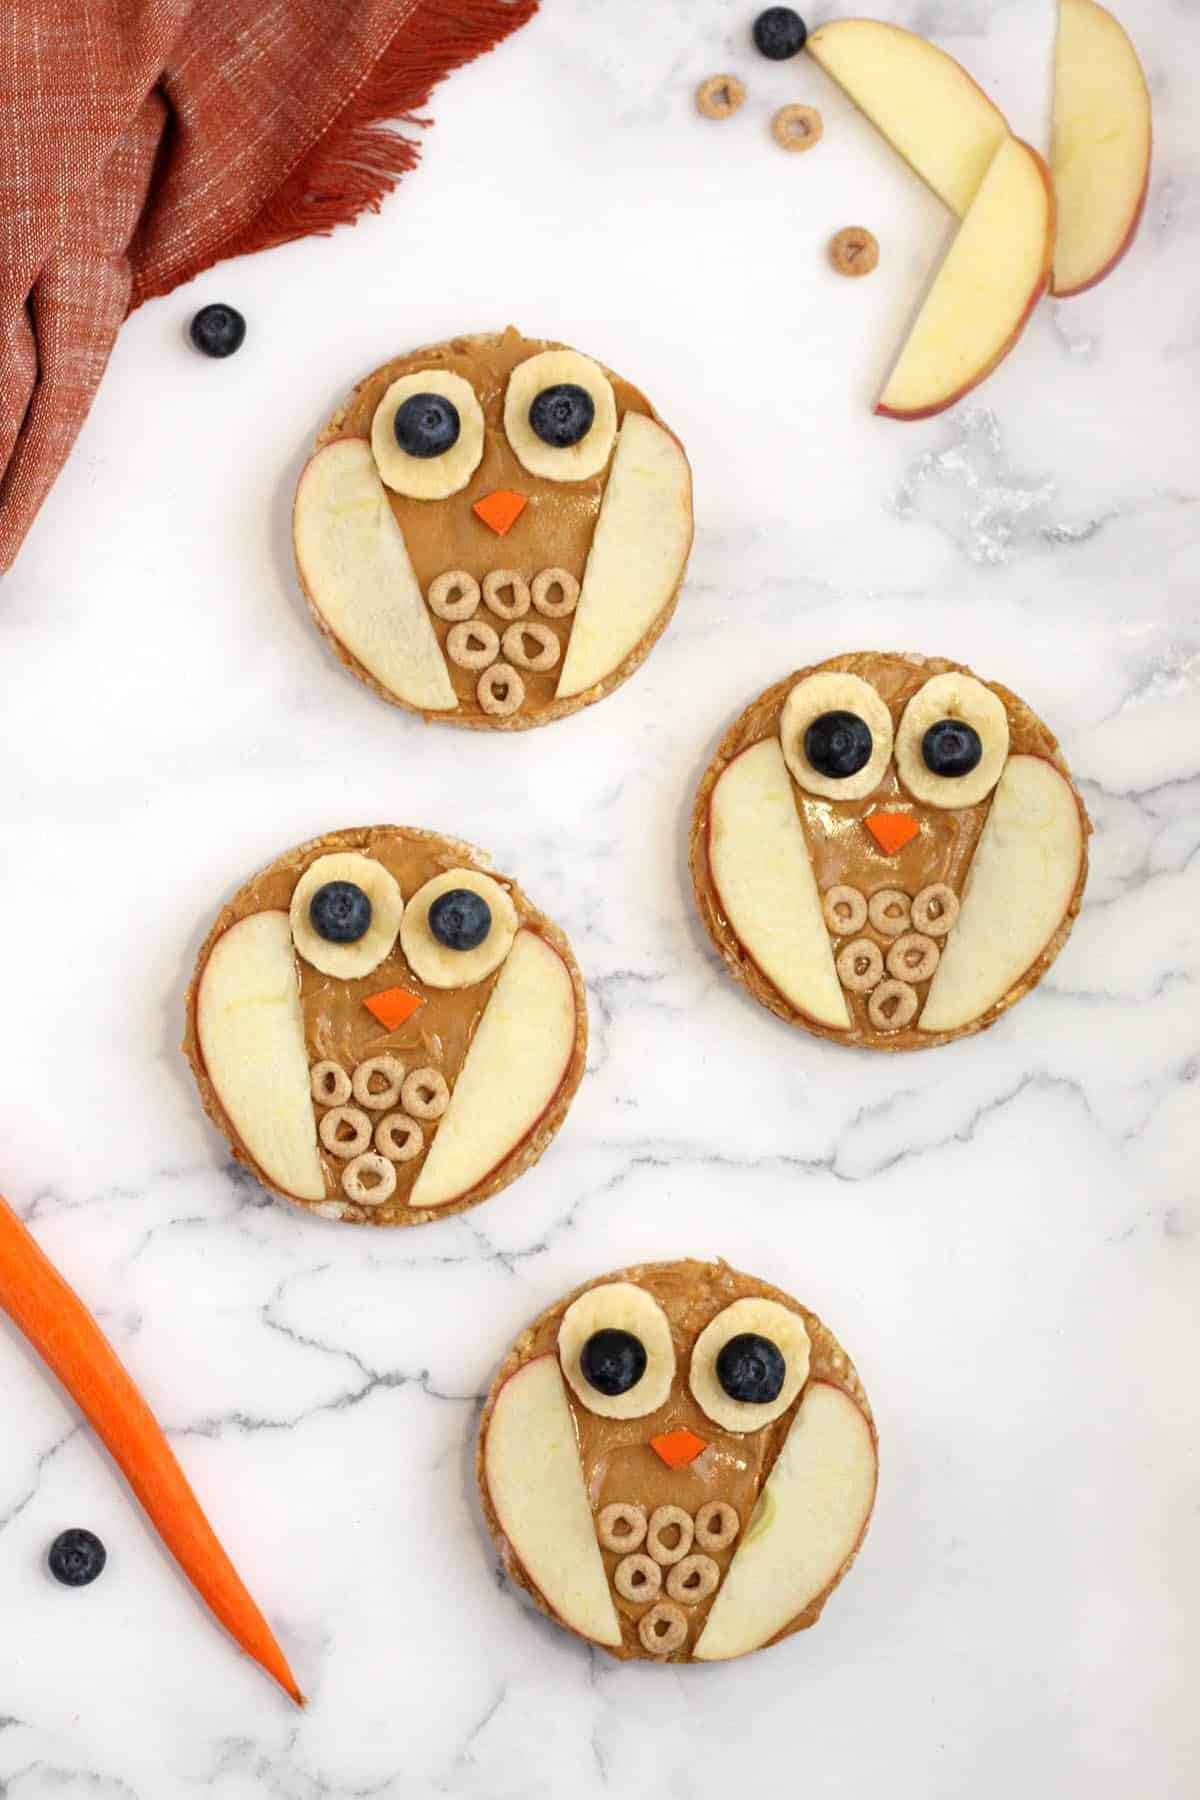 rice cakes with peanut butter and sliced fruit decorated to look like an owl